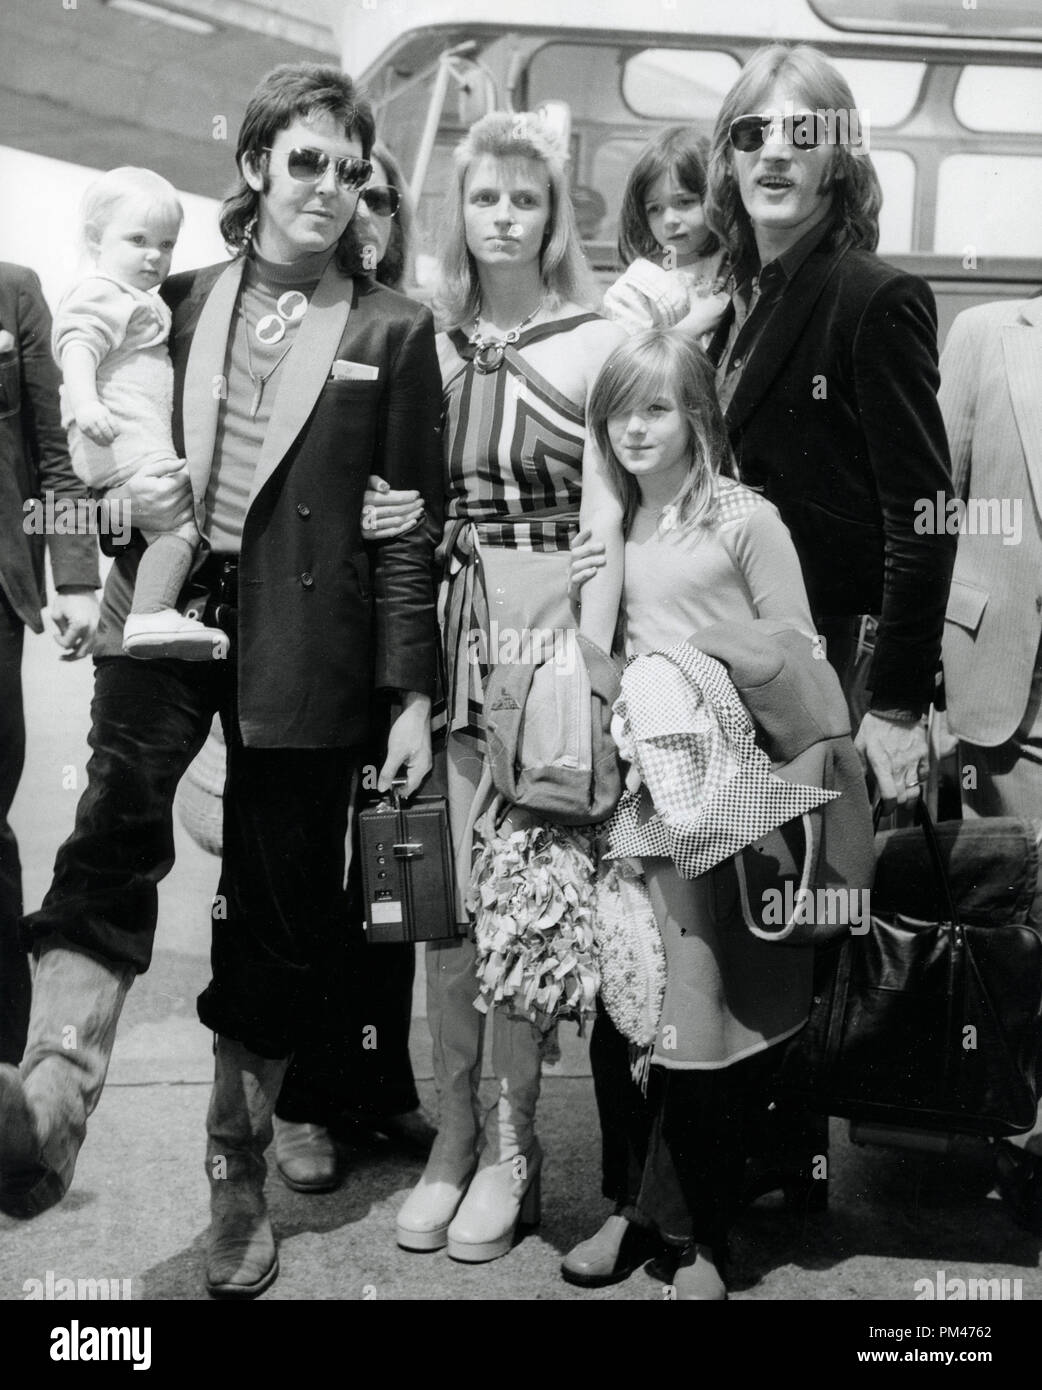 Paul McCartney and Linda McCartney, with daughter Stella in his arms and Heather holding Linda's arm, 1973.  File Reference # 1105_004THA Stock Photo